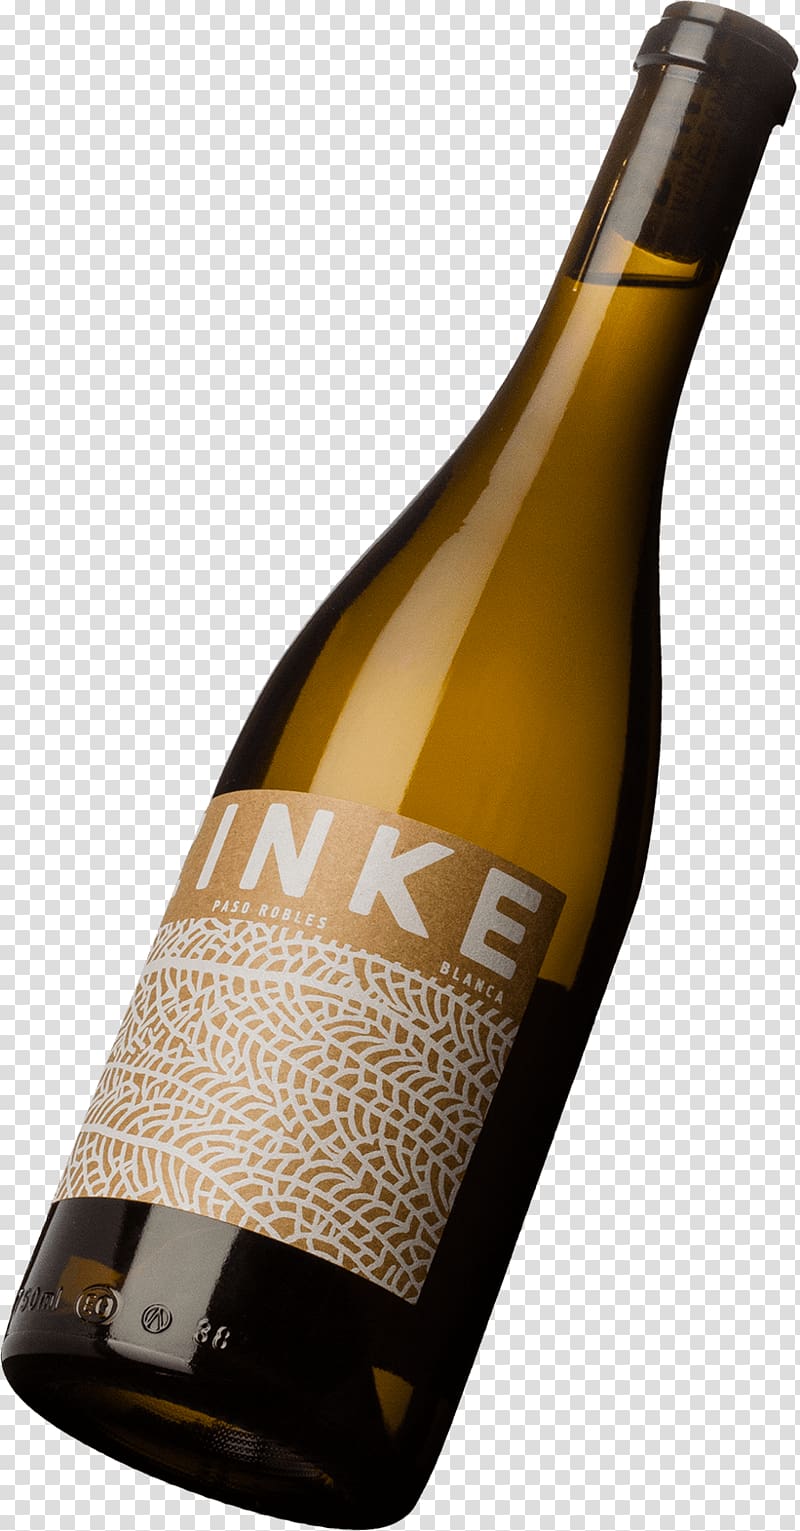 Zinke Wine Co. White wine Common Grape Vine Beer, moscato wine grapes transparent background PNG clipart